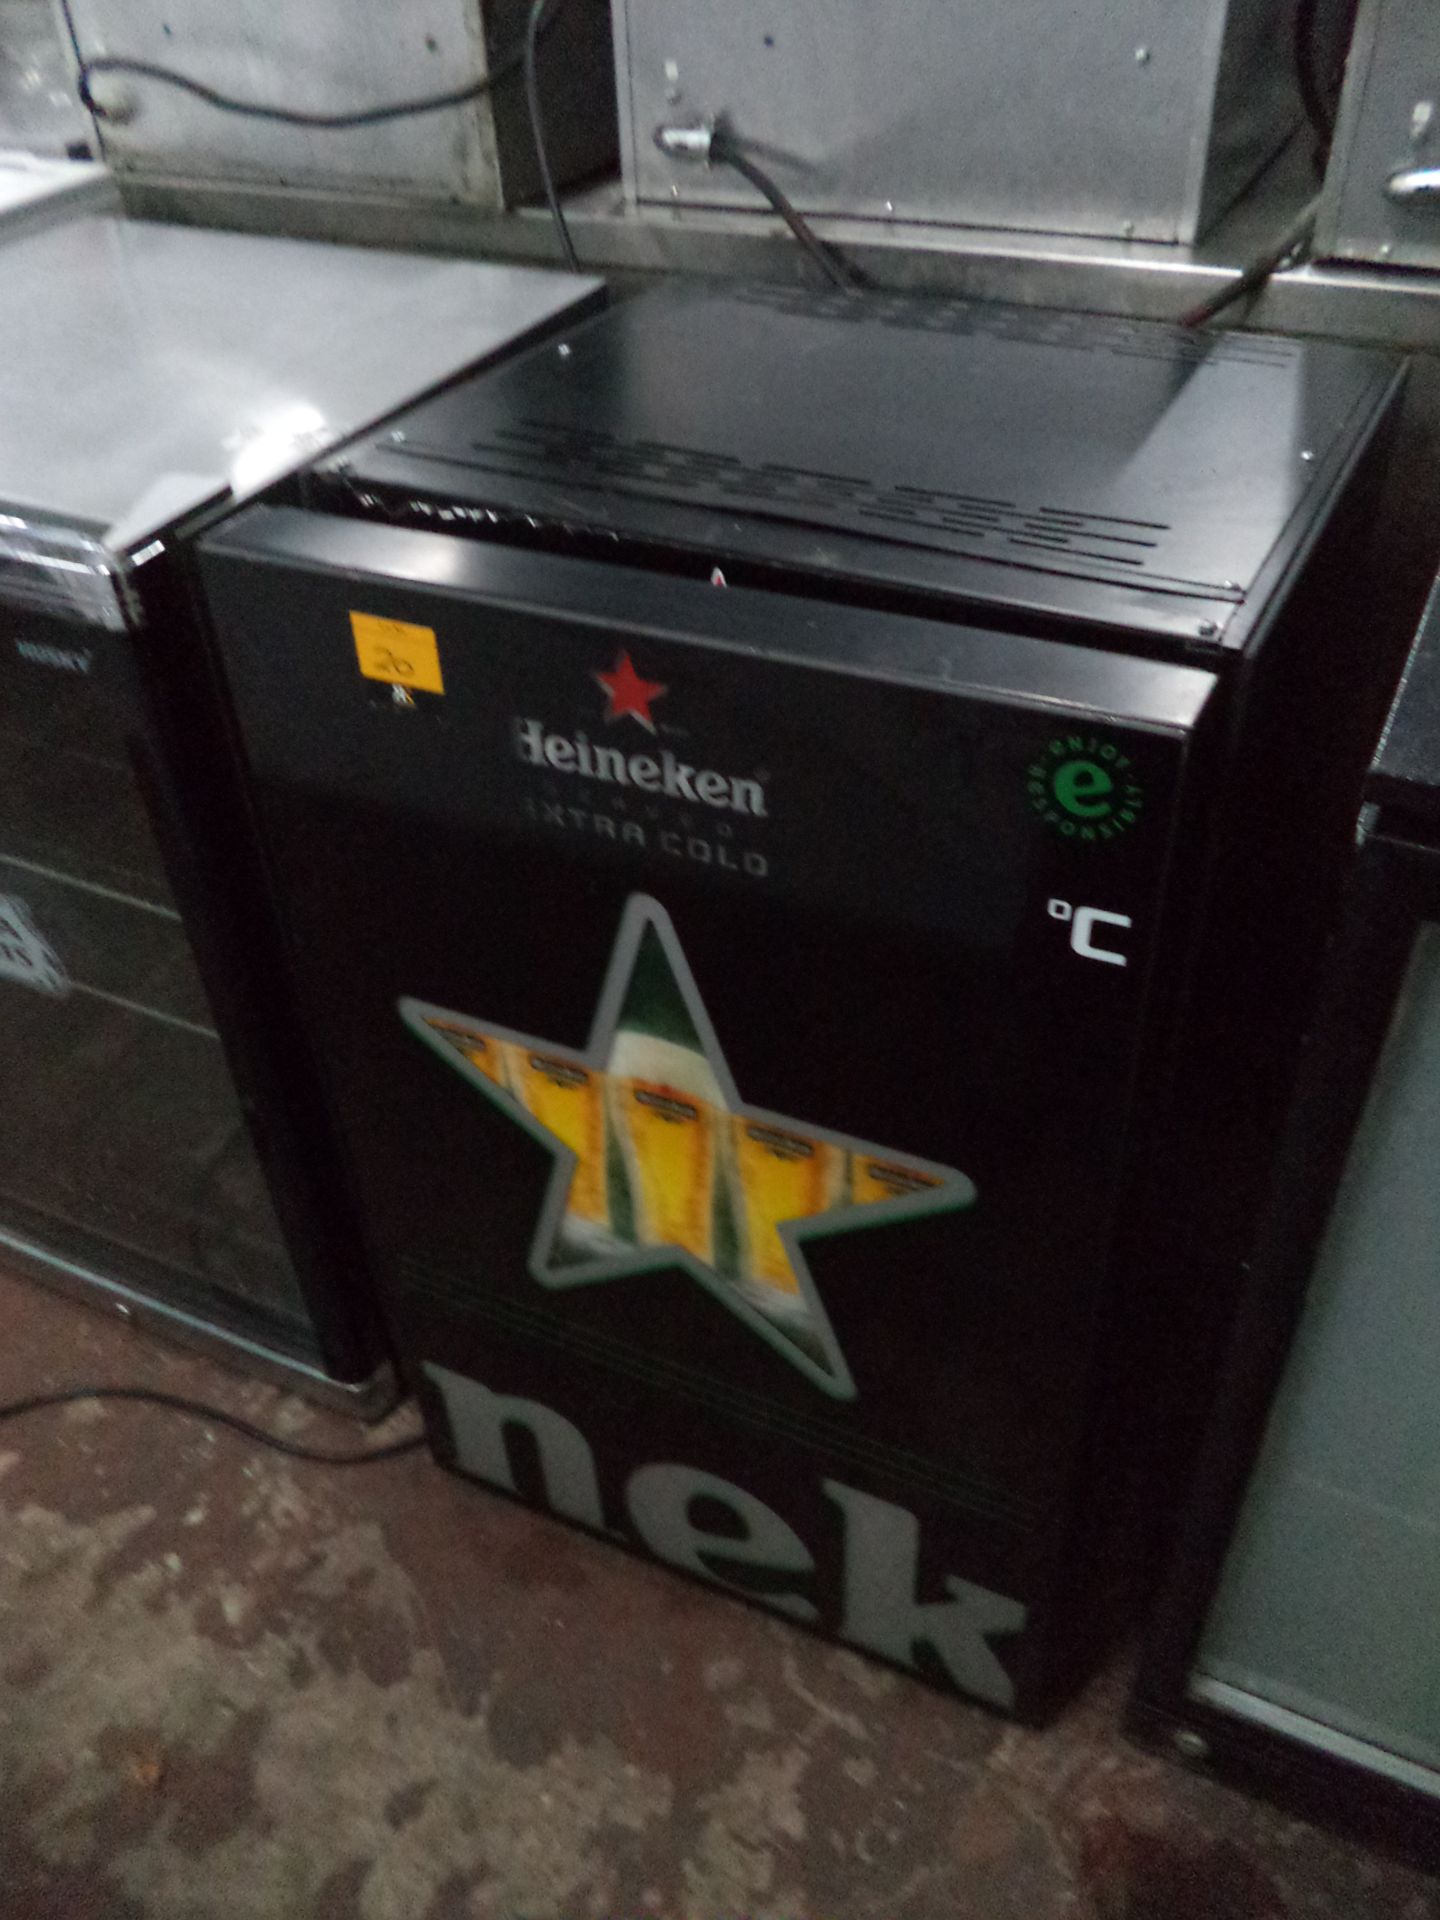 Heineken branded fridge IMPORTANT: Please remember goods successfully bid upon must be paid for - Image 3 of 3